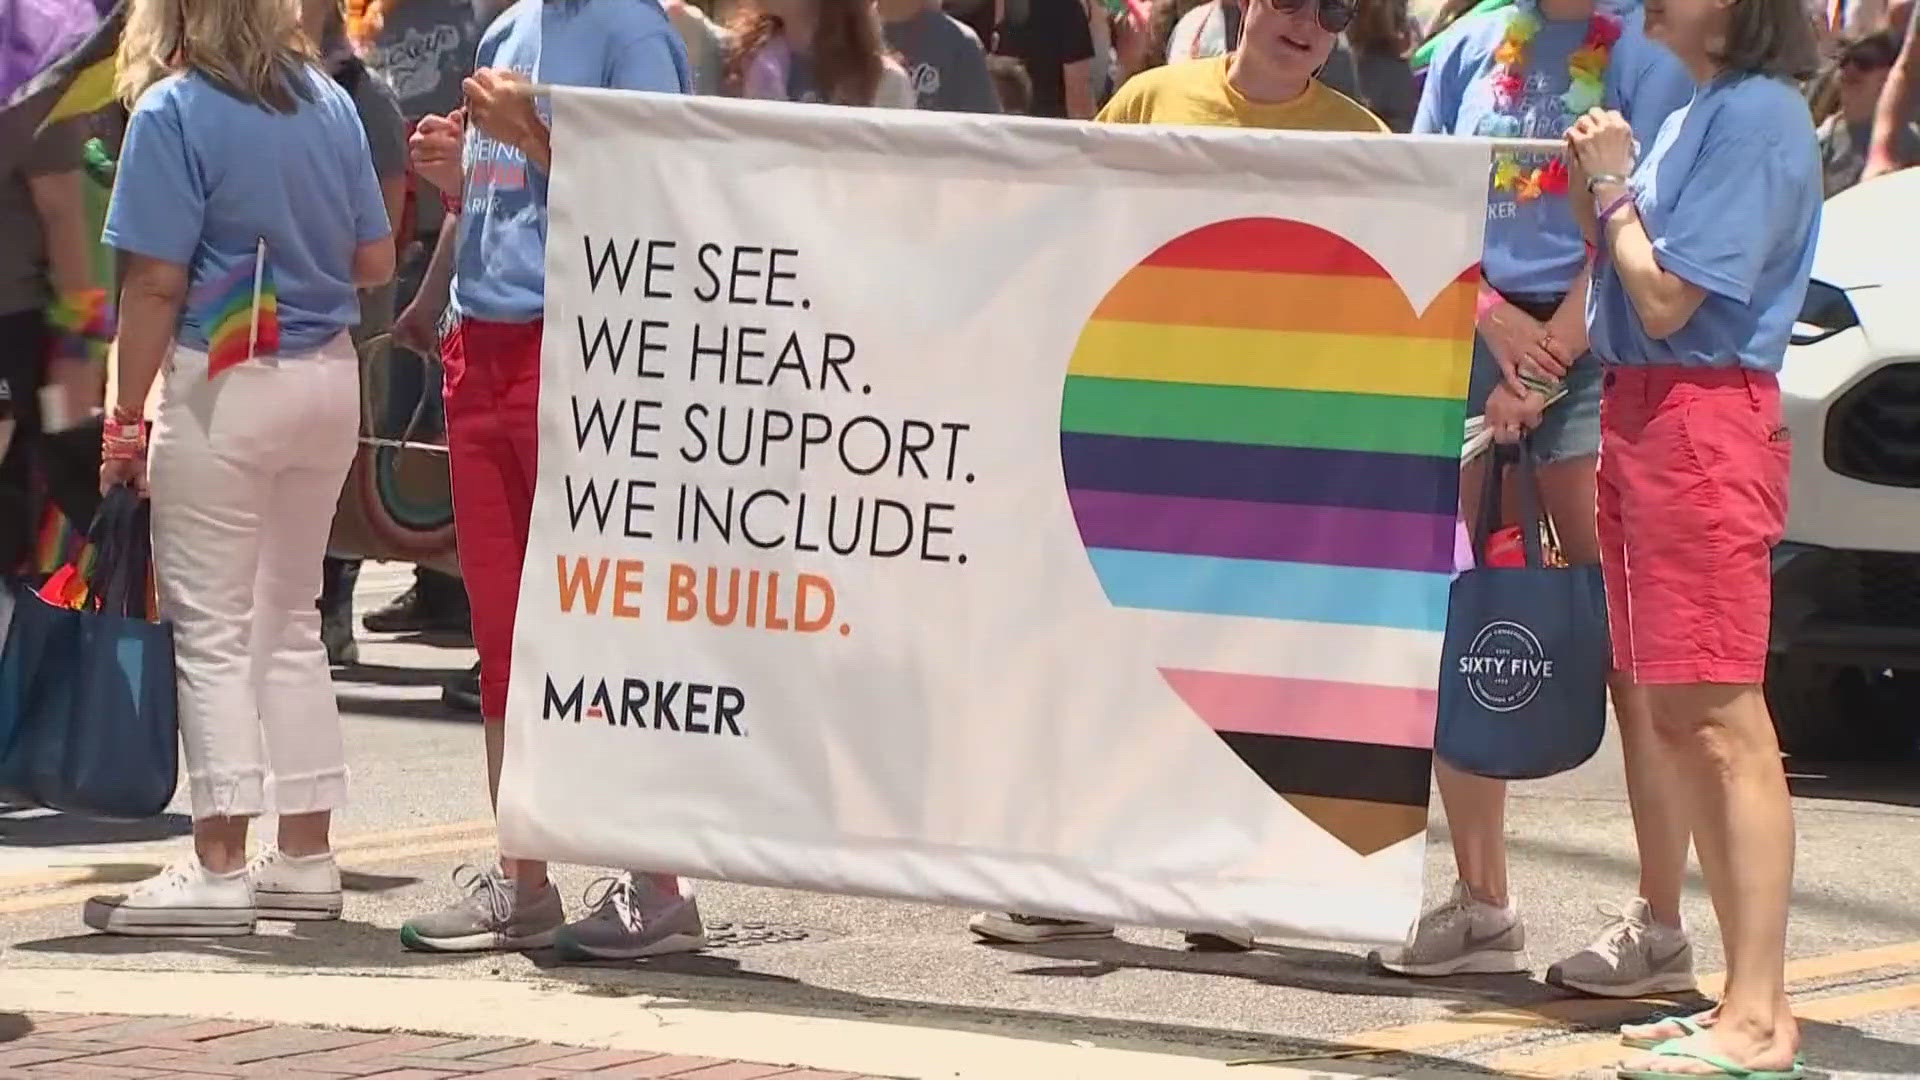 The first-ever Pride March in Columbus was held in 1981, bringing around 200 people to the streets of downtown Columbus.